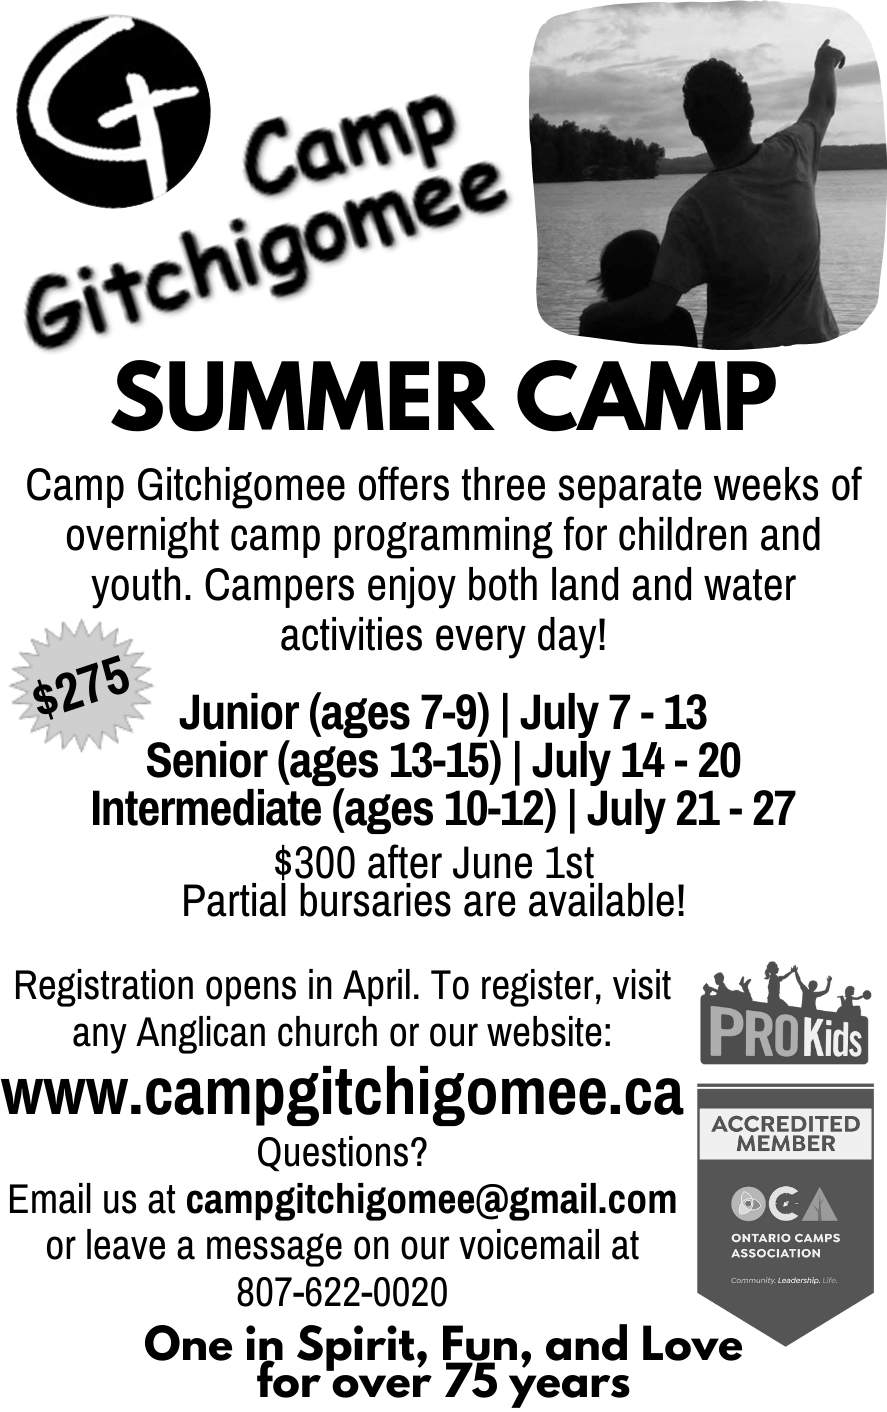 Camp Gitchigomee flyer with same information provided in ad text.